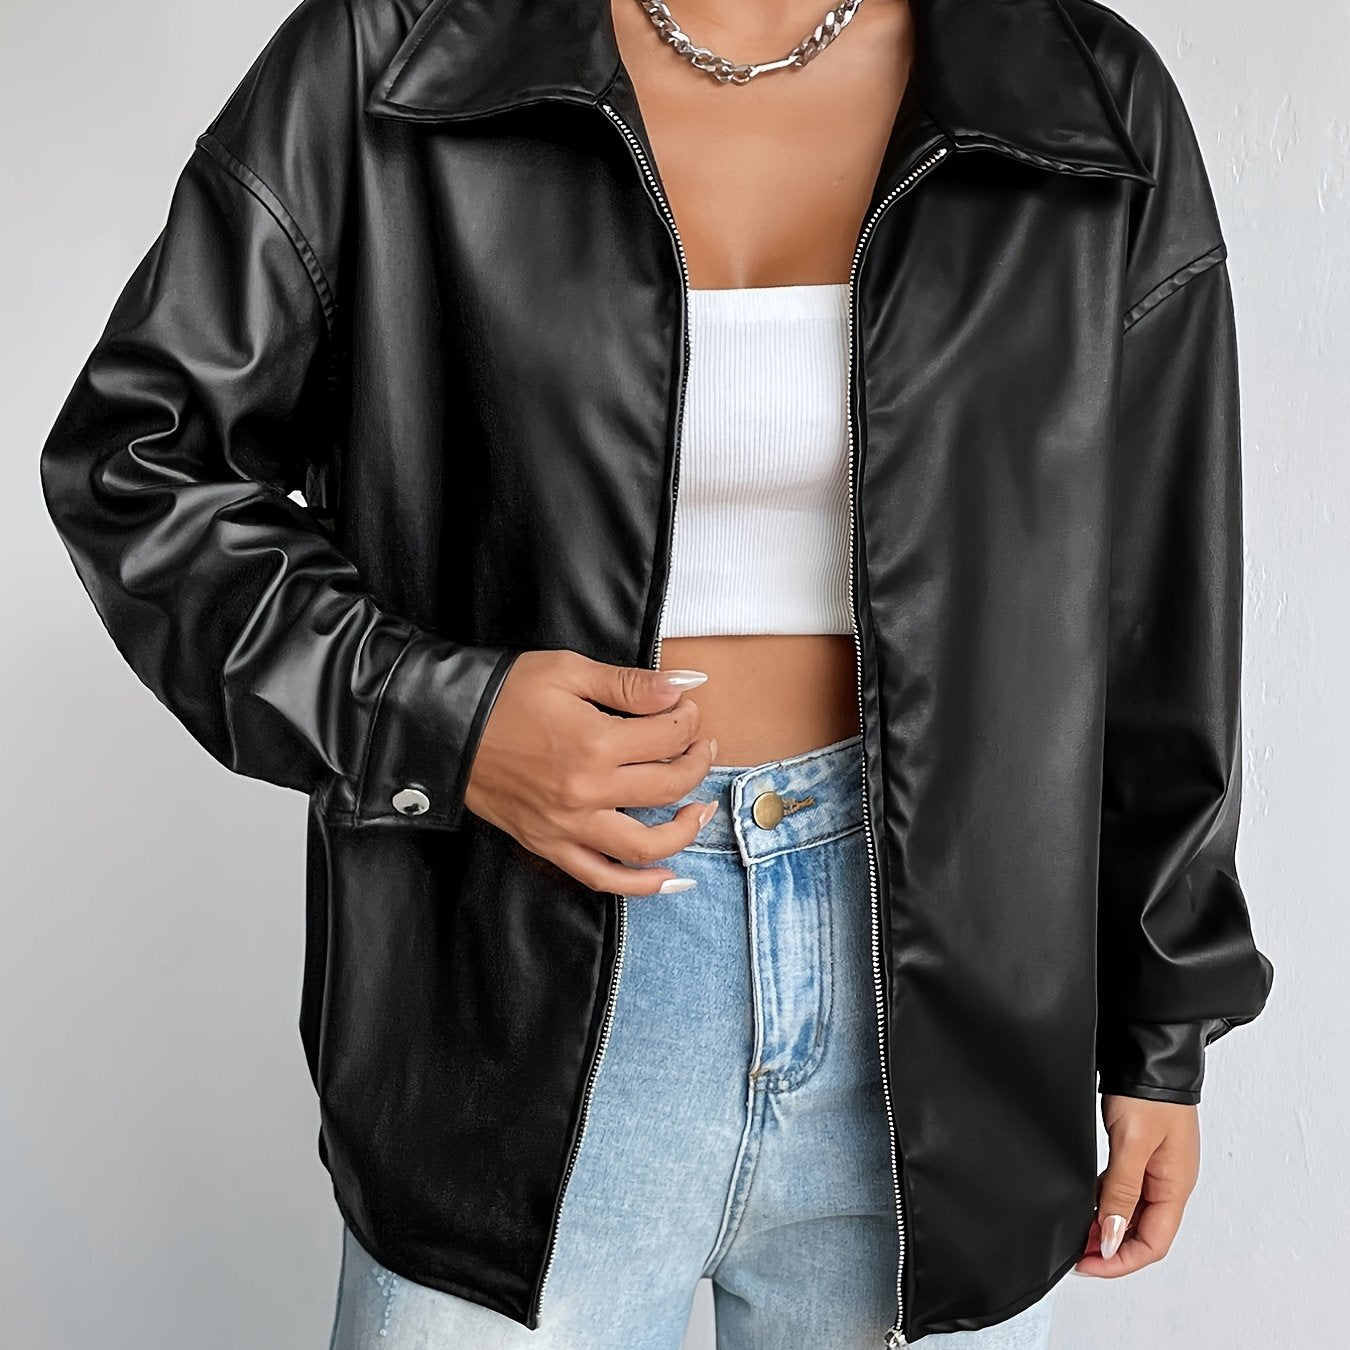 Antmvs Solid Zipper Front PU Leather Jacket, Casual Y2K Long Sleeve Jacket For Spring & Fall, Women's Clothing